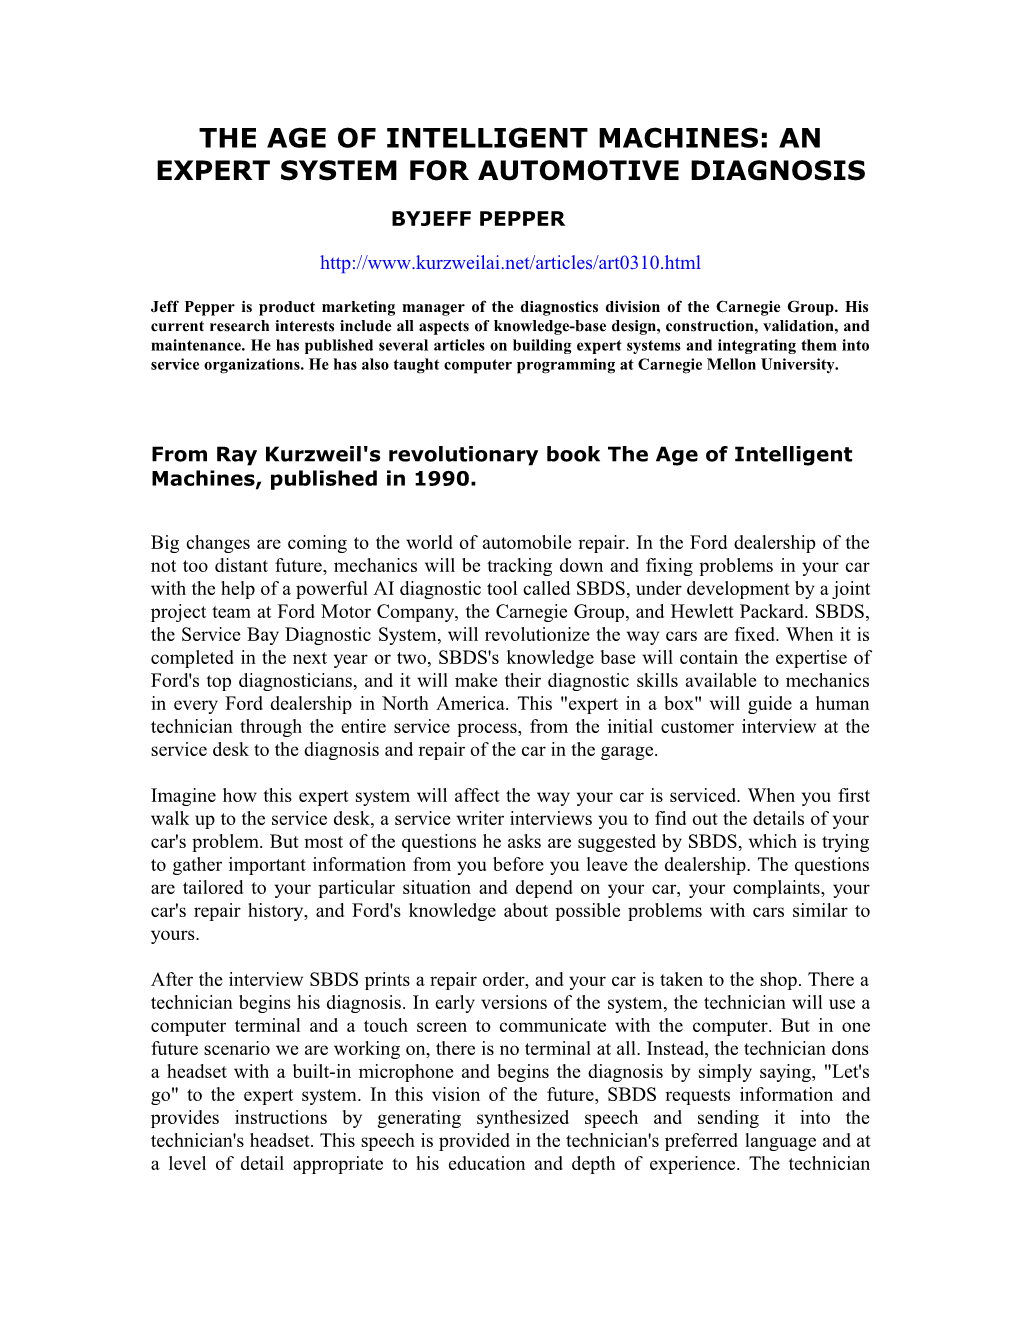 The Age of Intelligent Machines: an Expert System for Automotive Diagnosis